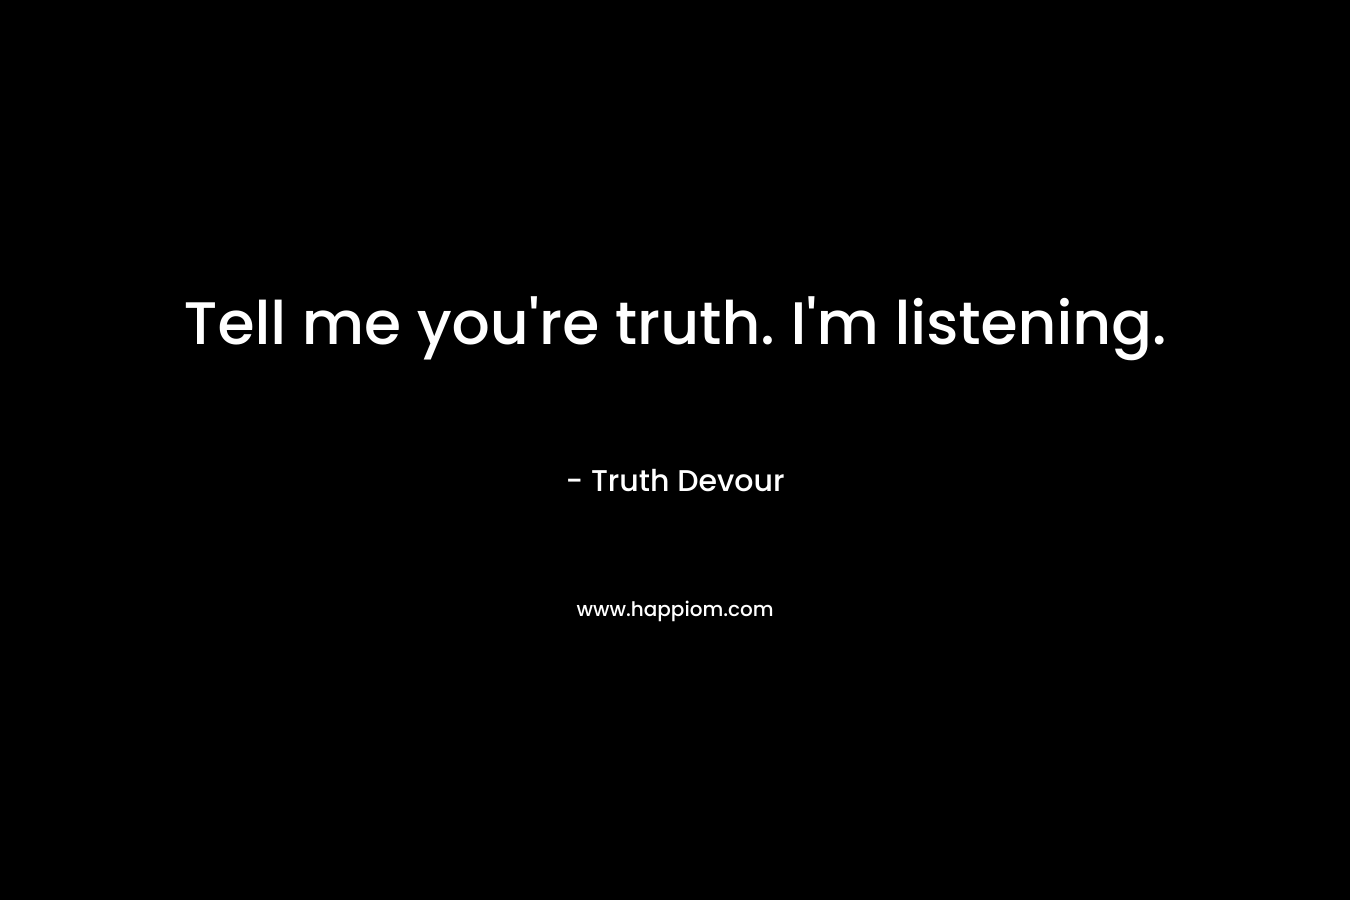 Tell me you're truth. I'm listening.